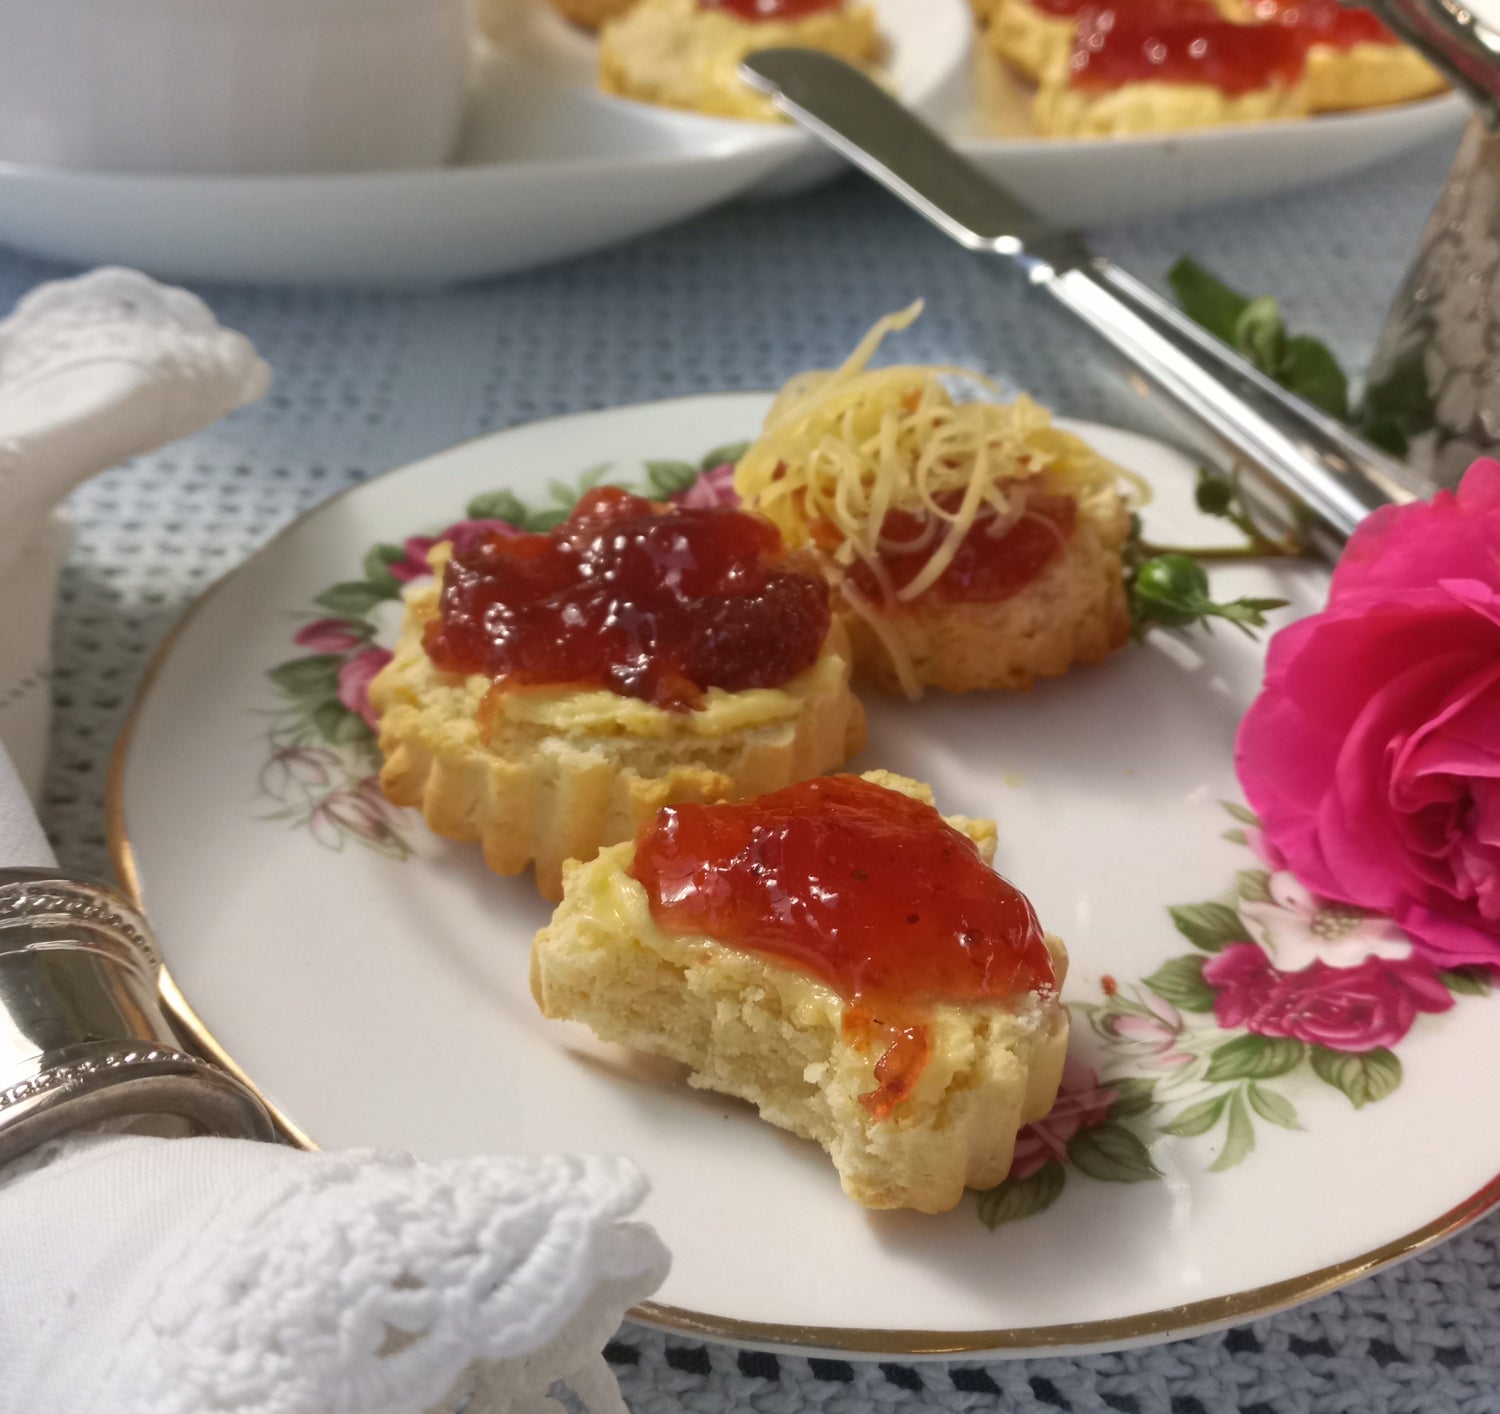 Scones made with Coleman Royal Bakeries Gluten-free Plain Flour.